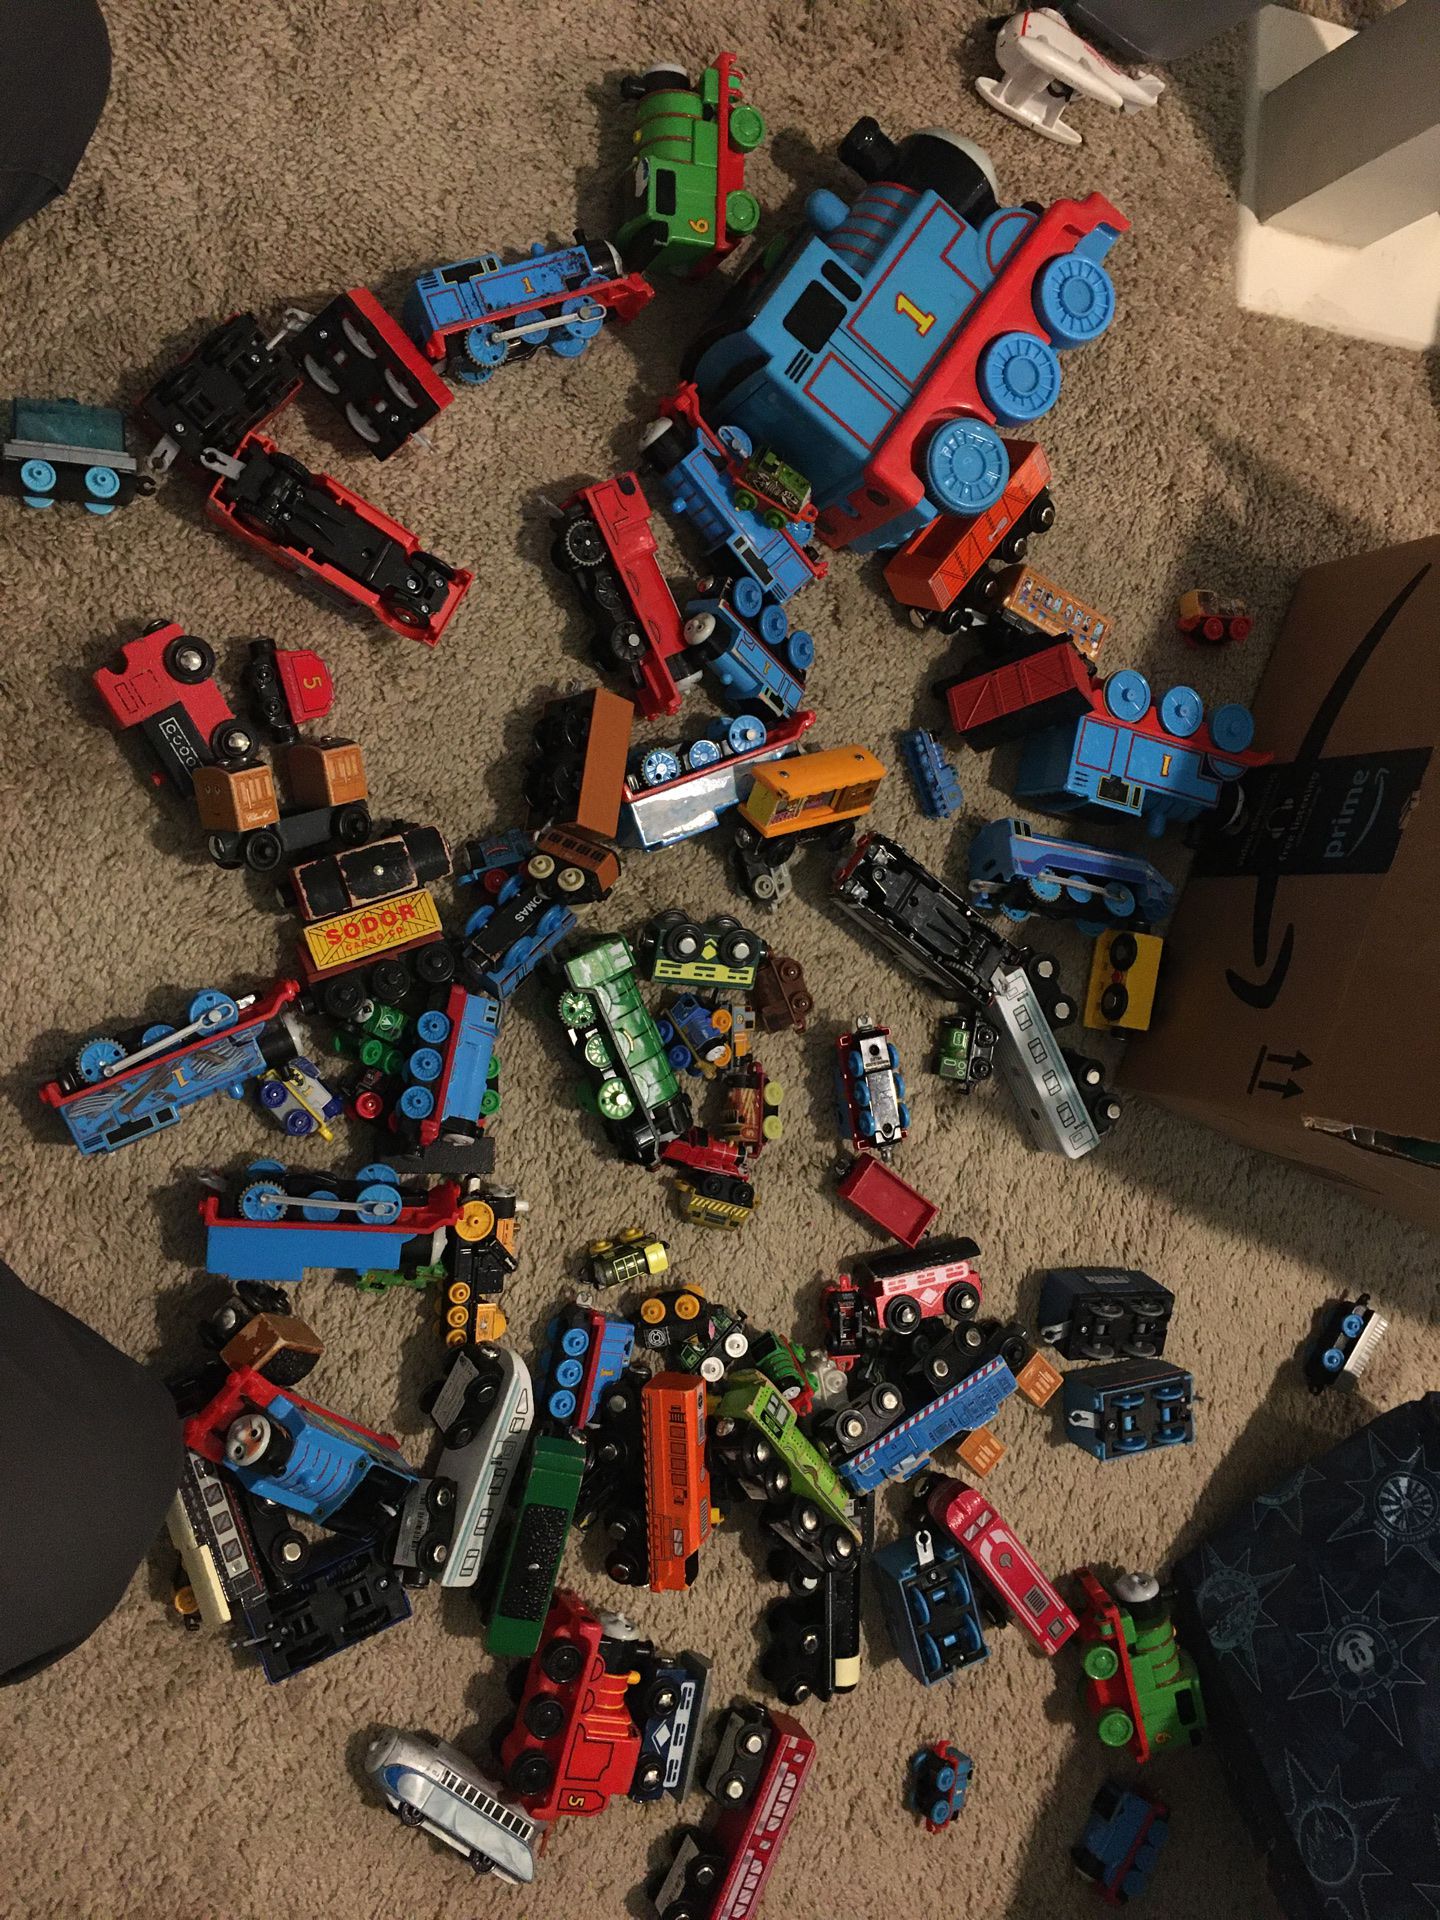 Thomas the Train characters with a lot with tracks